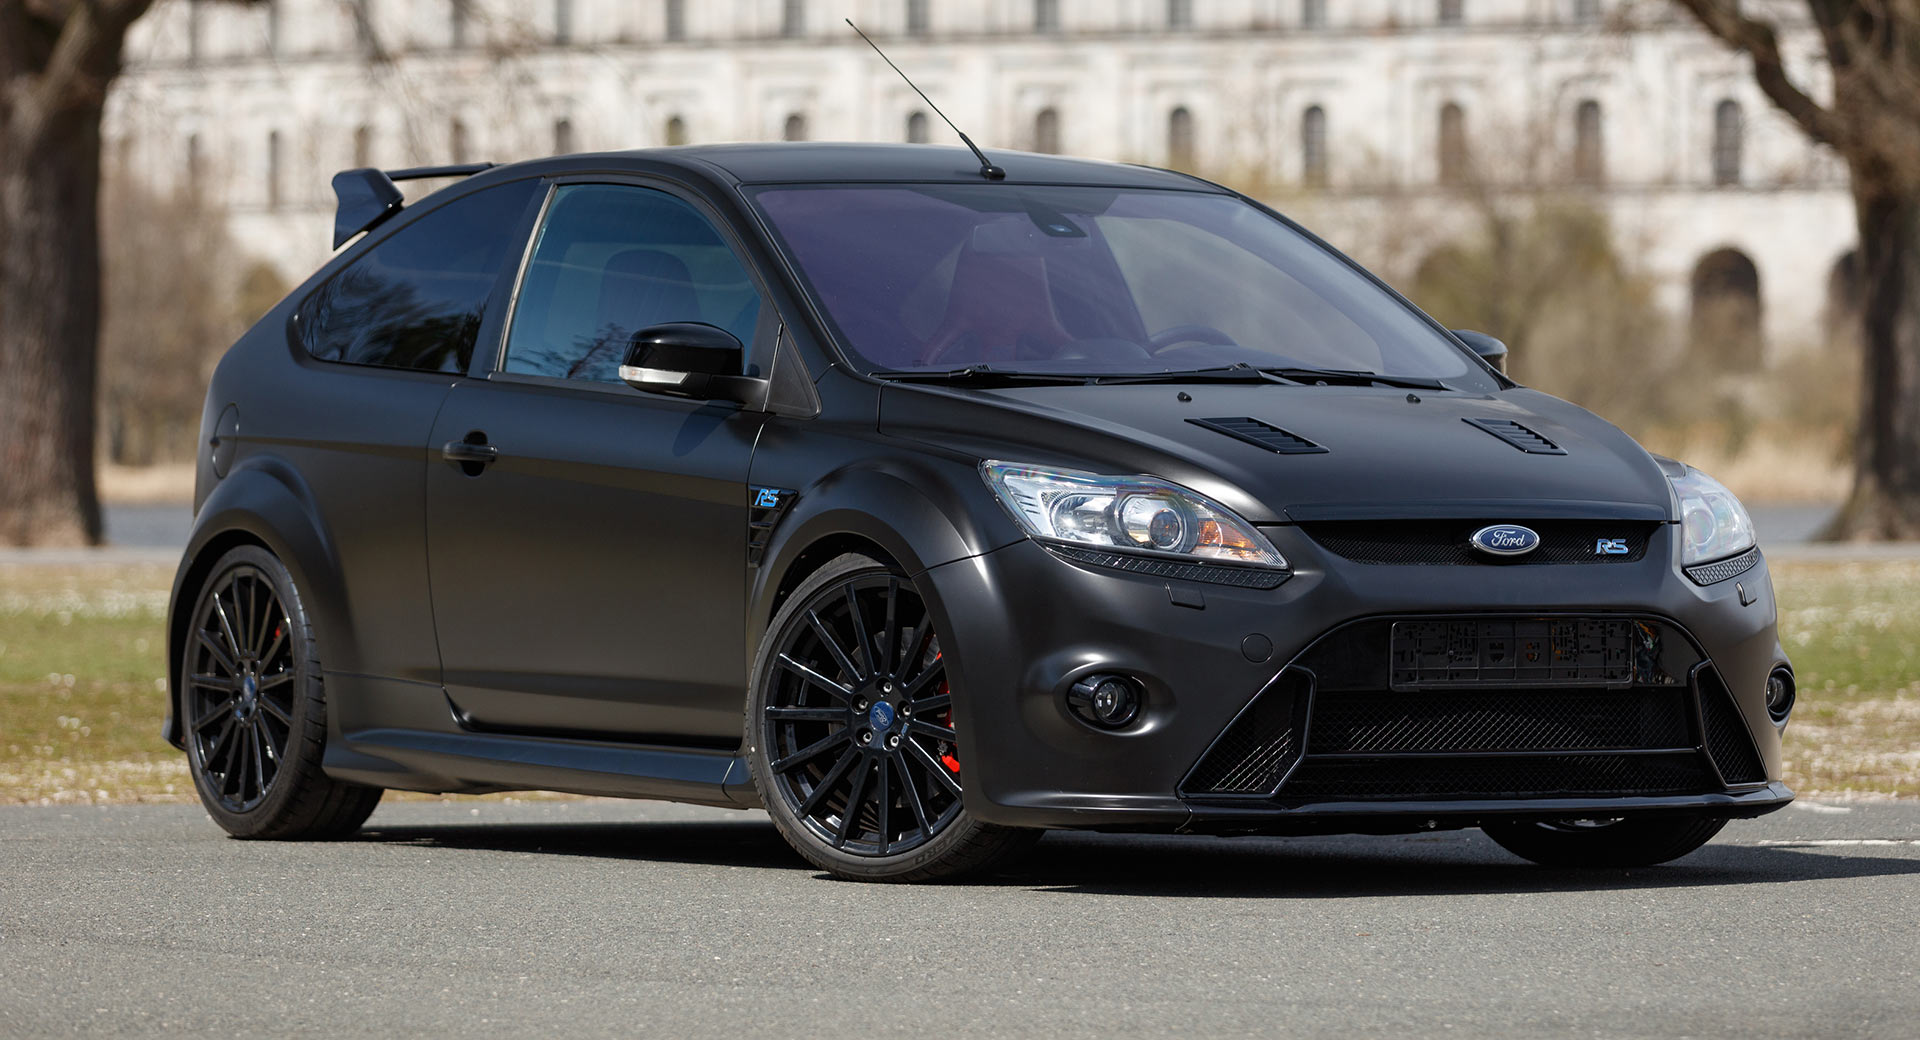 FORD FOCUS RS MK2 is the COOLEST HOTHATCH EVER! - REVIEW on